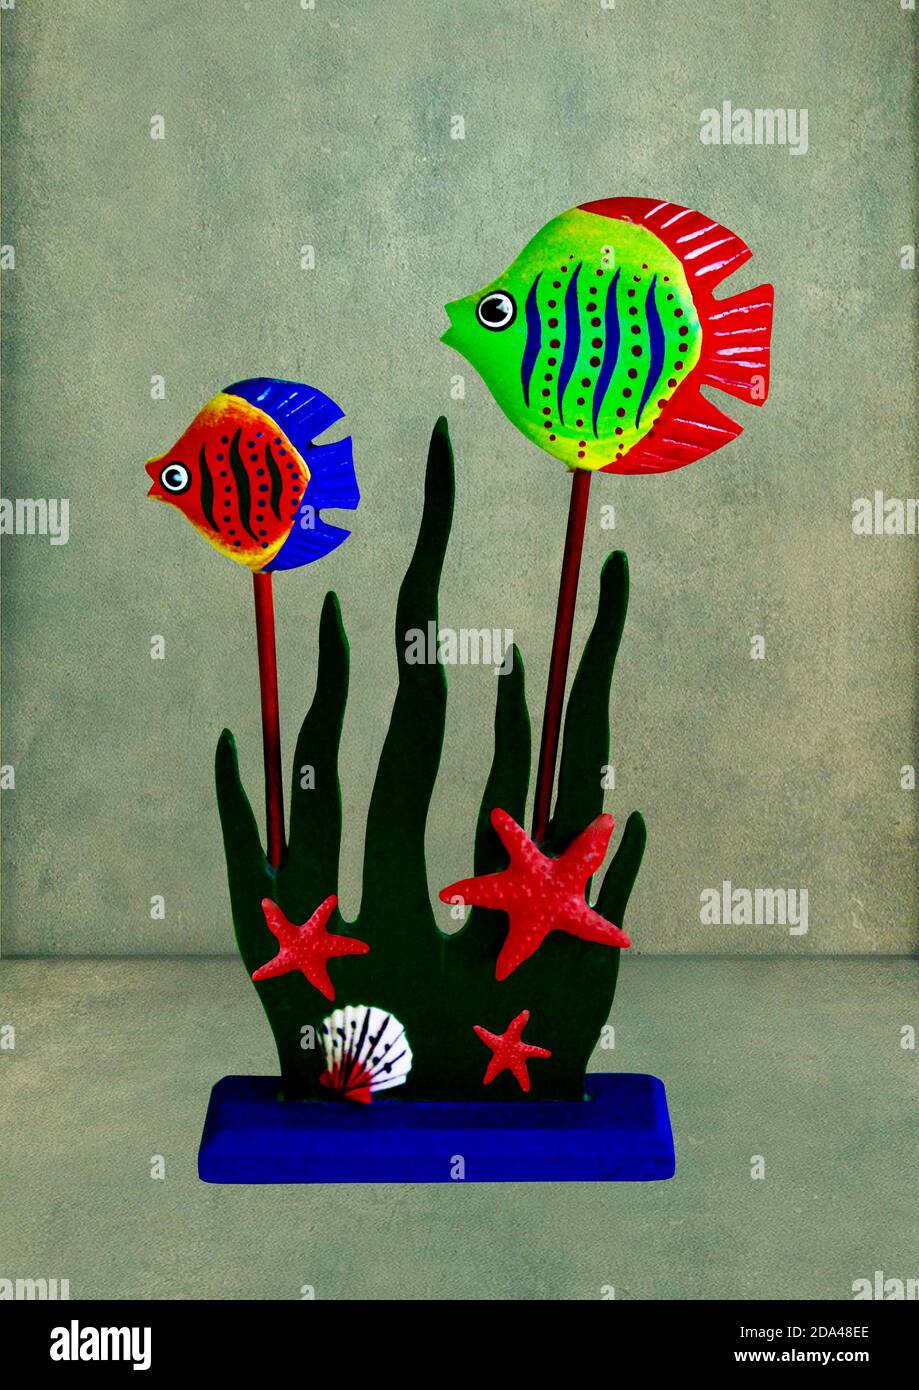 Playful fish ornament. Suitable for bathroom use. Stock Photo